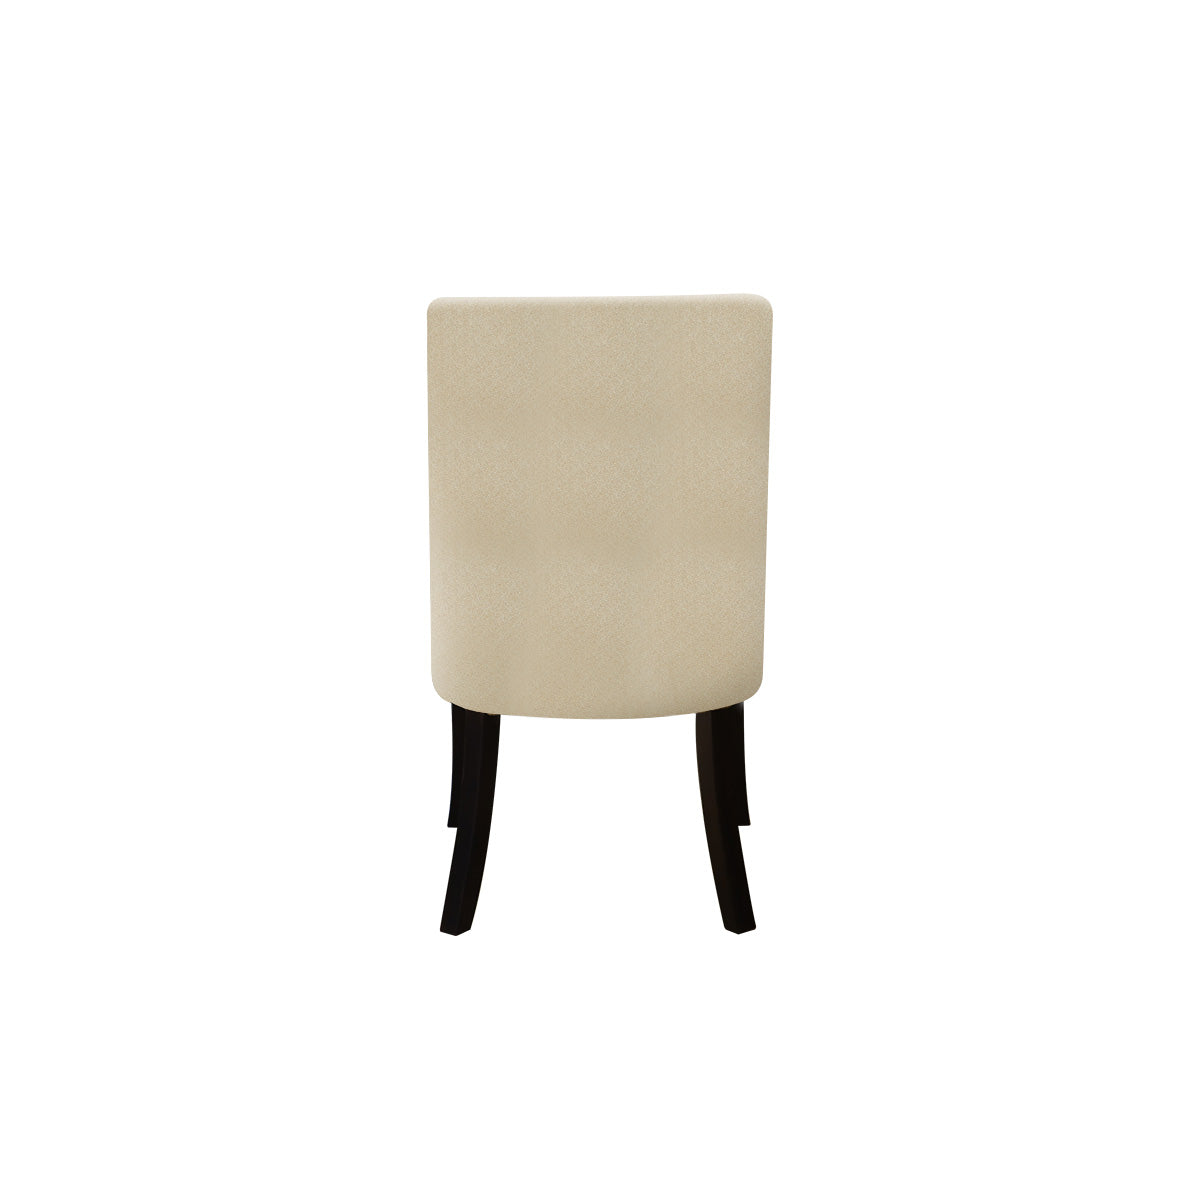 back view classy wood leg dining chair